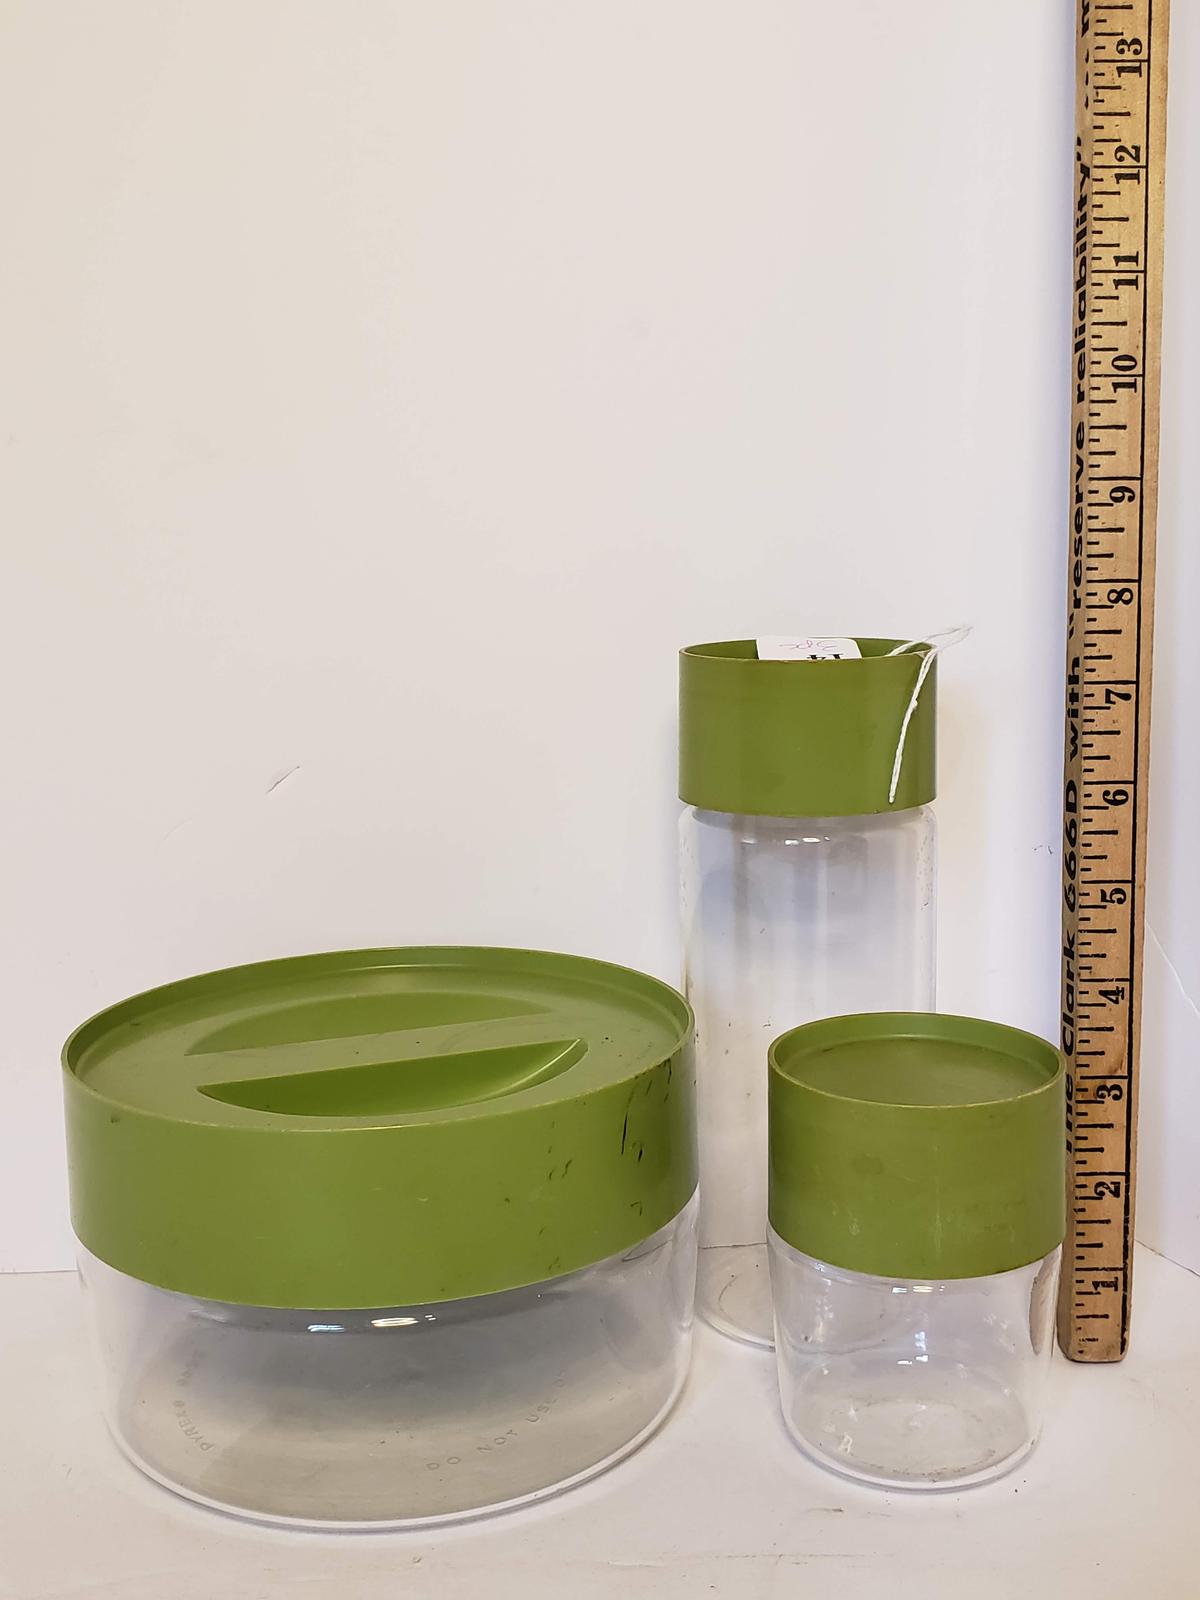 3 Pc. Vintage Pyrex Glass Canister Set with Green Plastic Lids